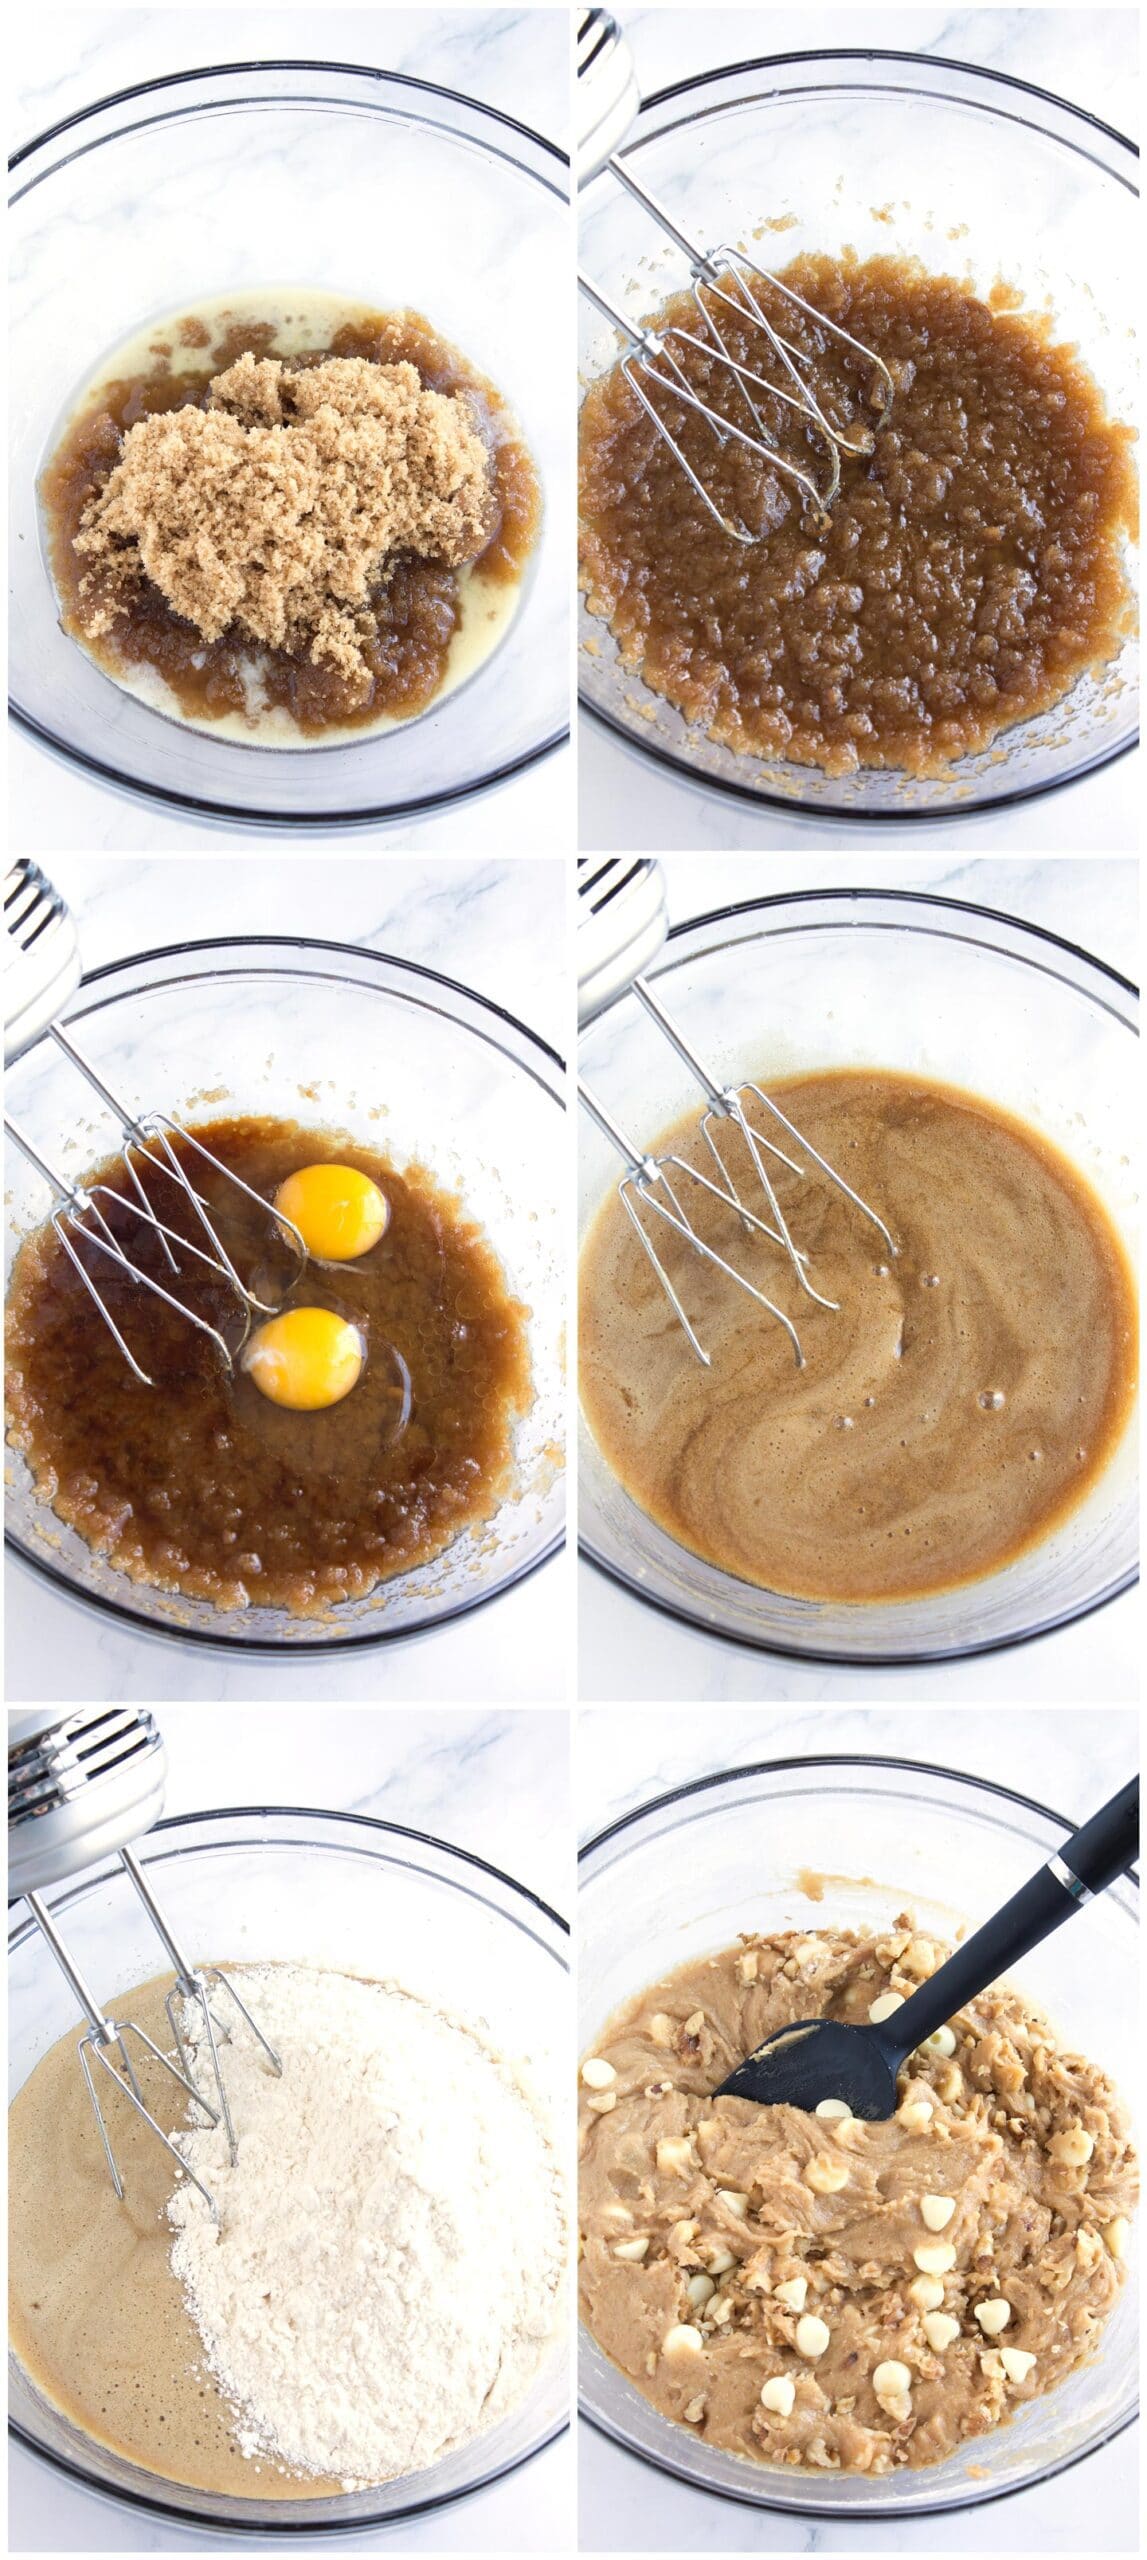 6 steps to mixing the blondie batter